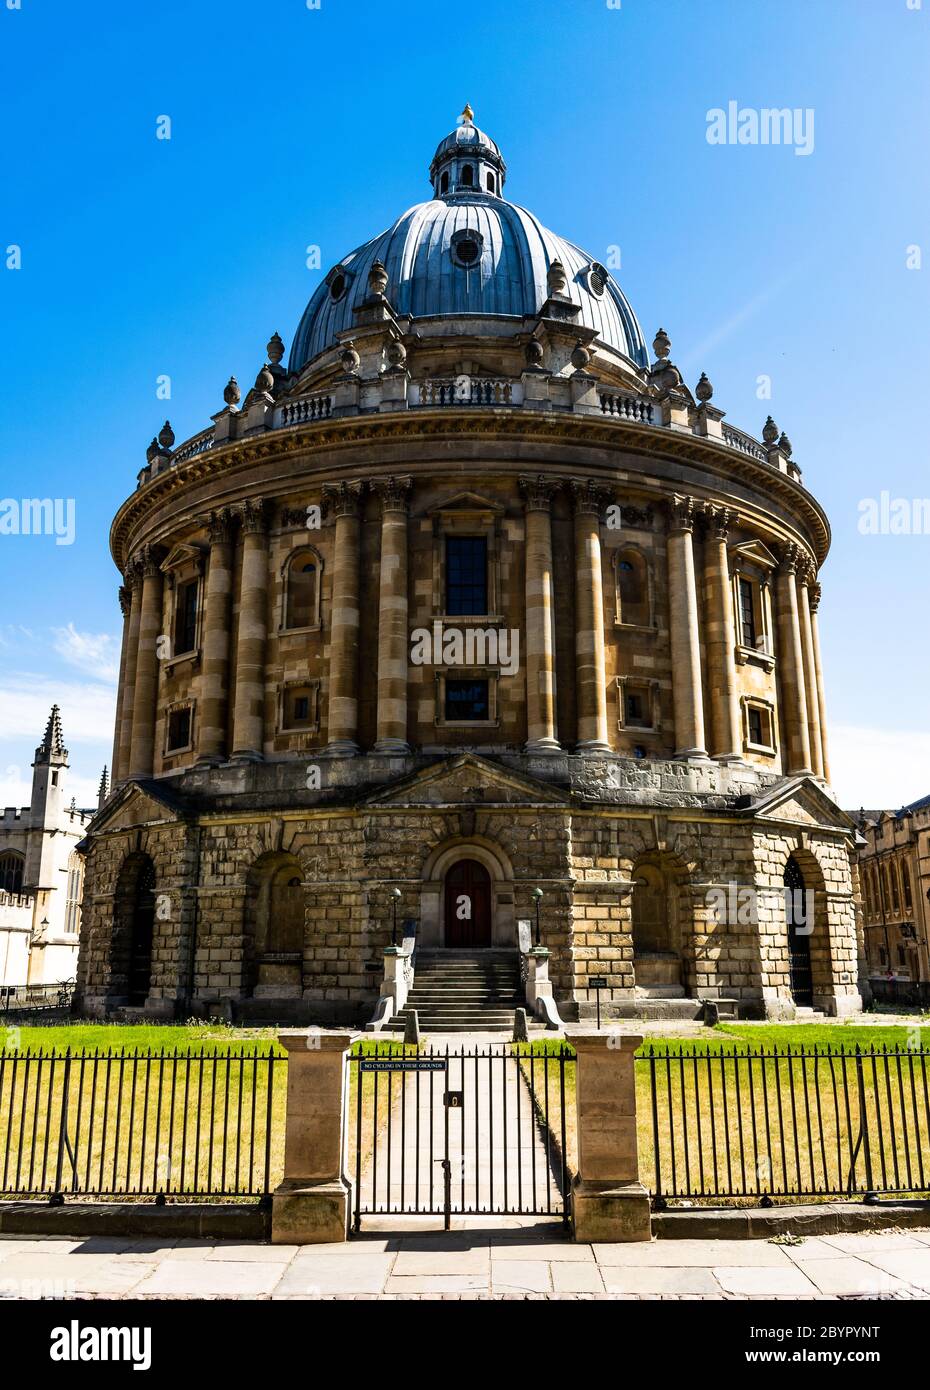 The old architecture from Oxford Stock Photo